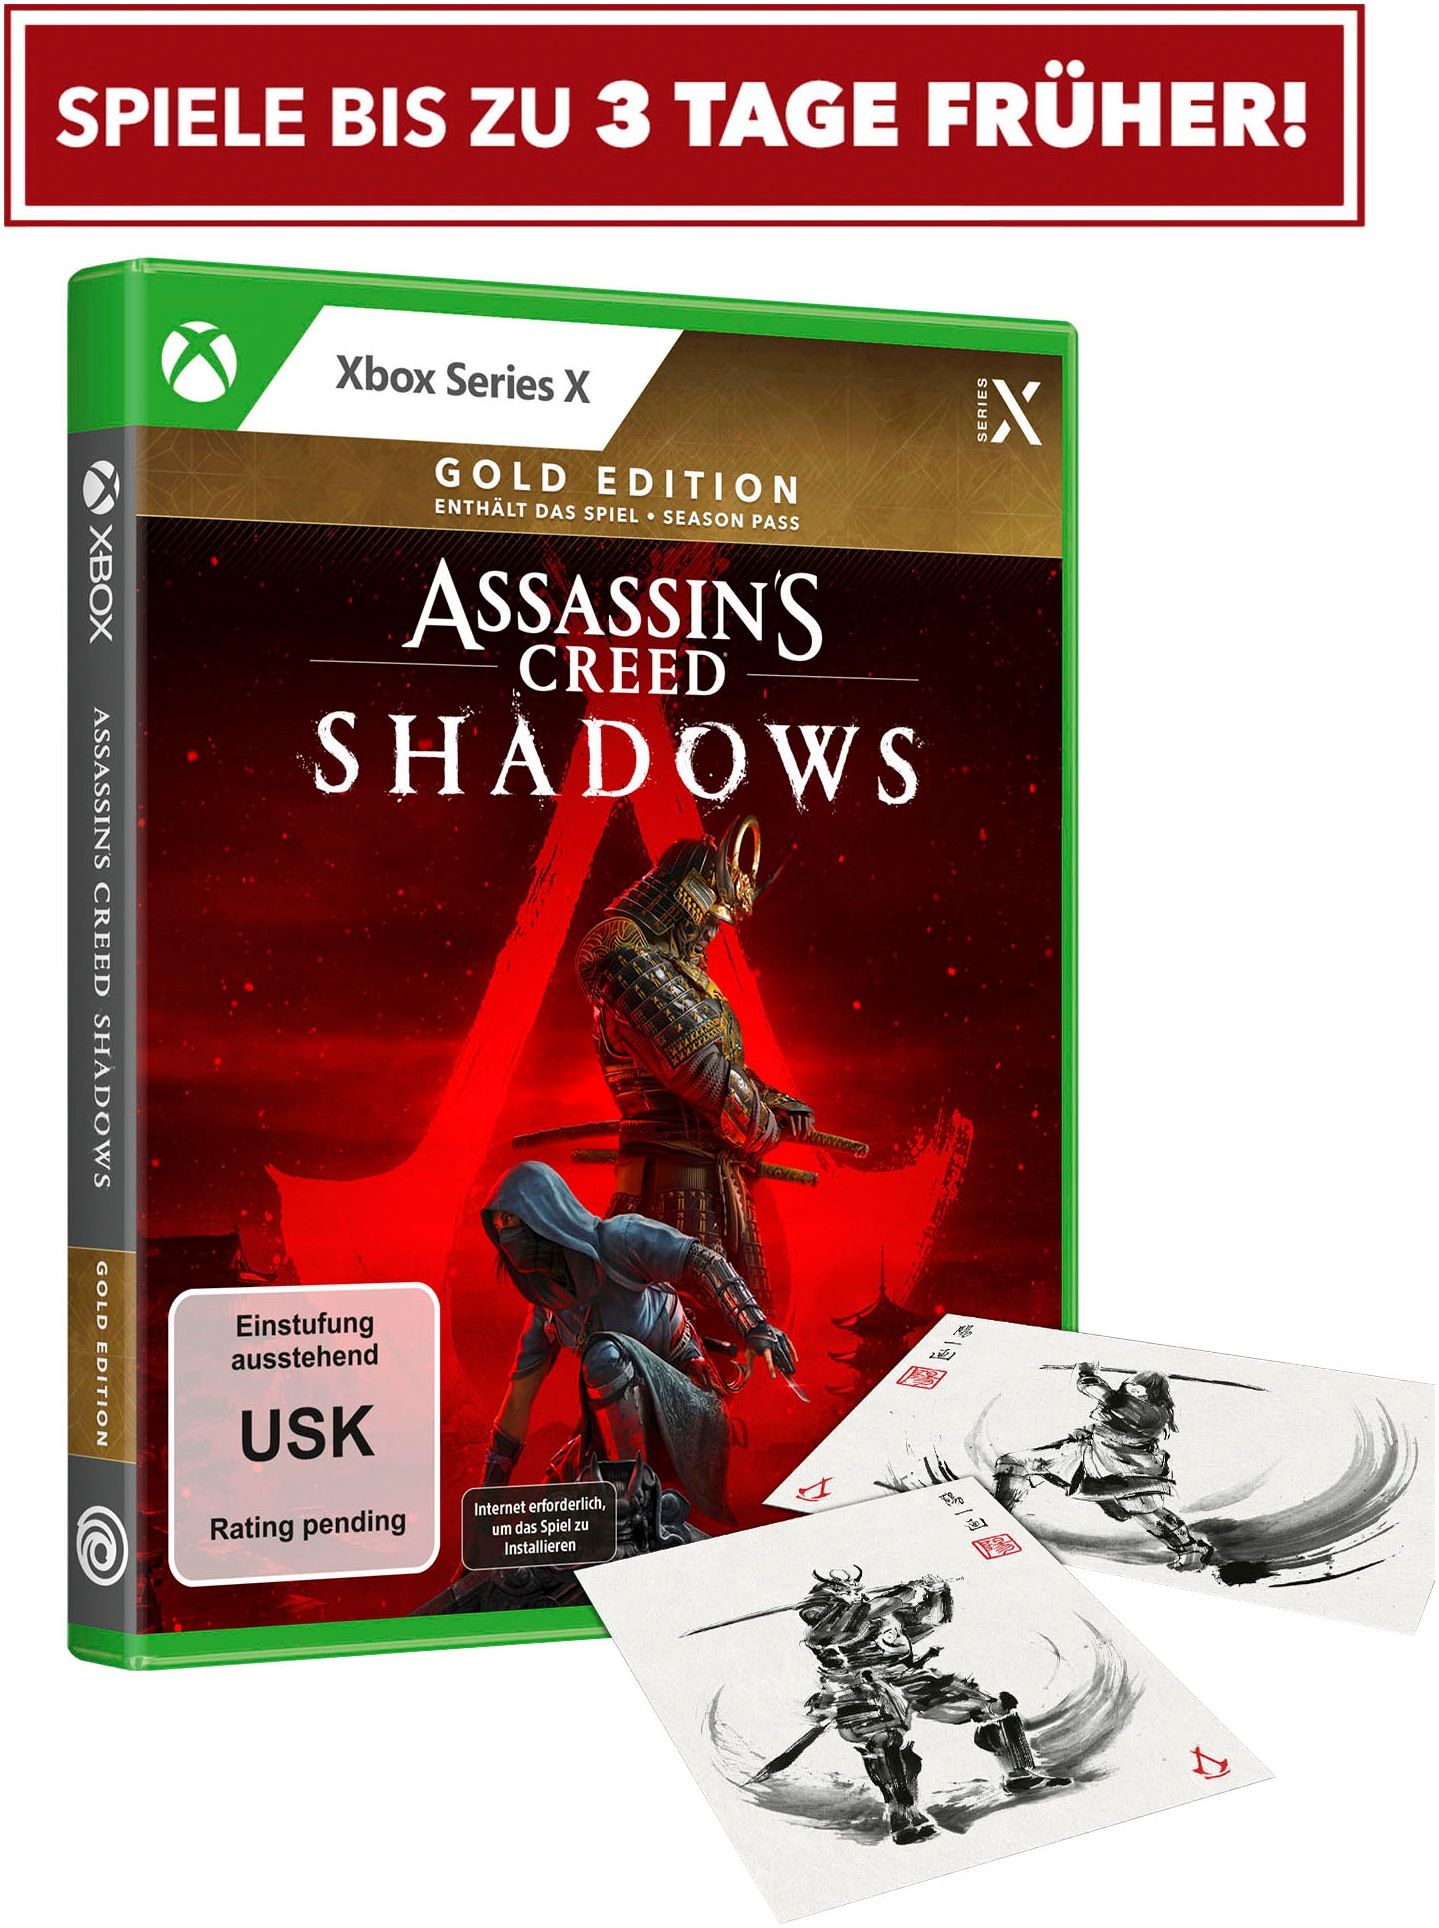 UBISOFT Spielesoftware »Assassin's Creed Shadows Gold Edition«, Xbox Series X